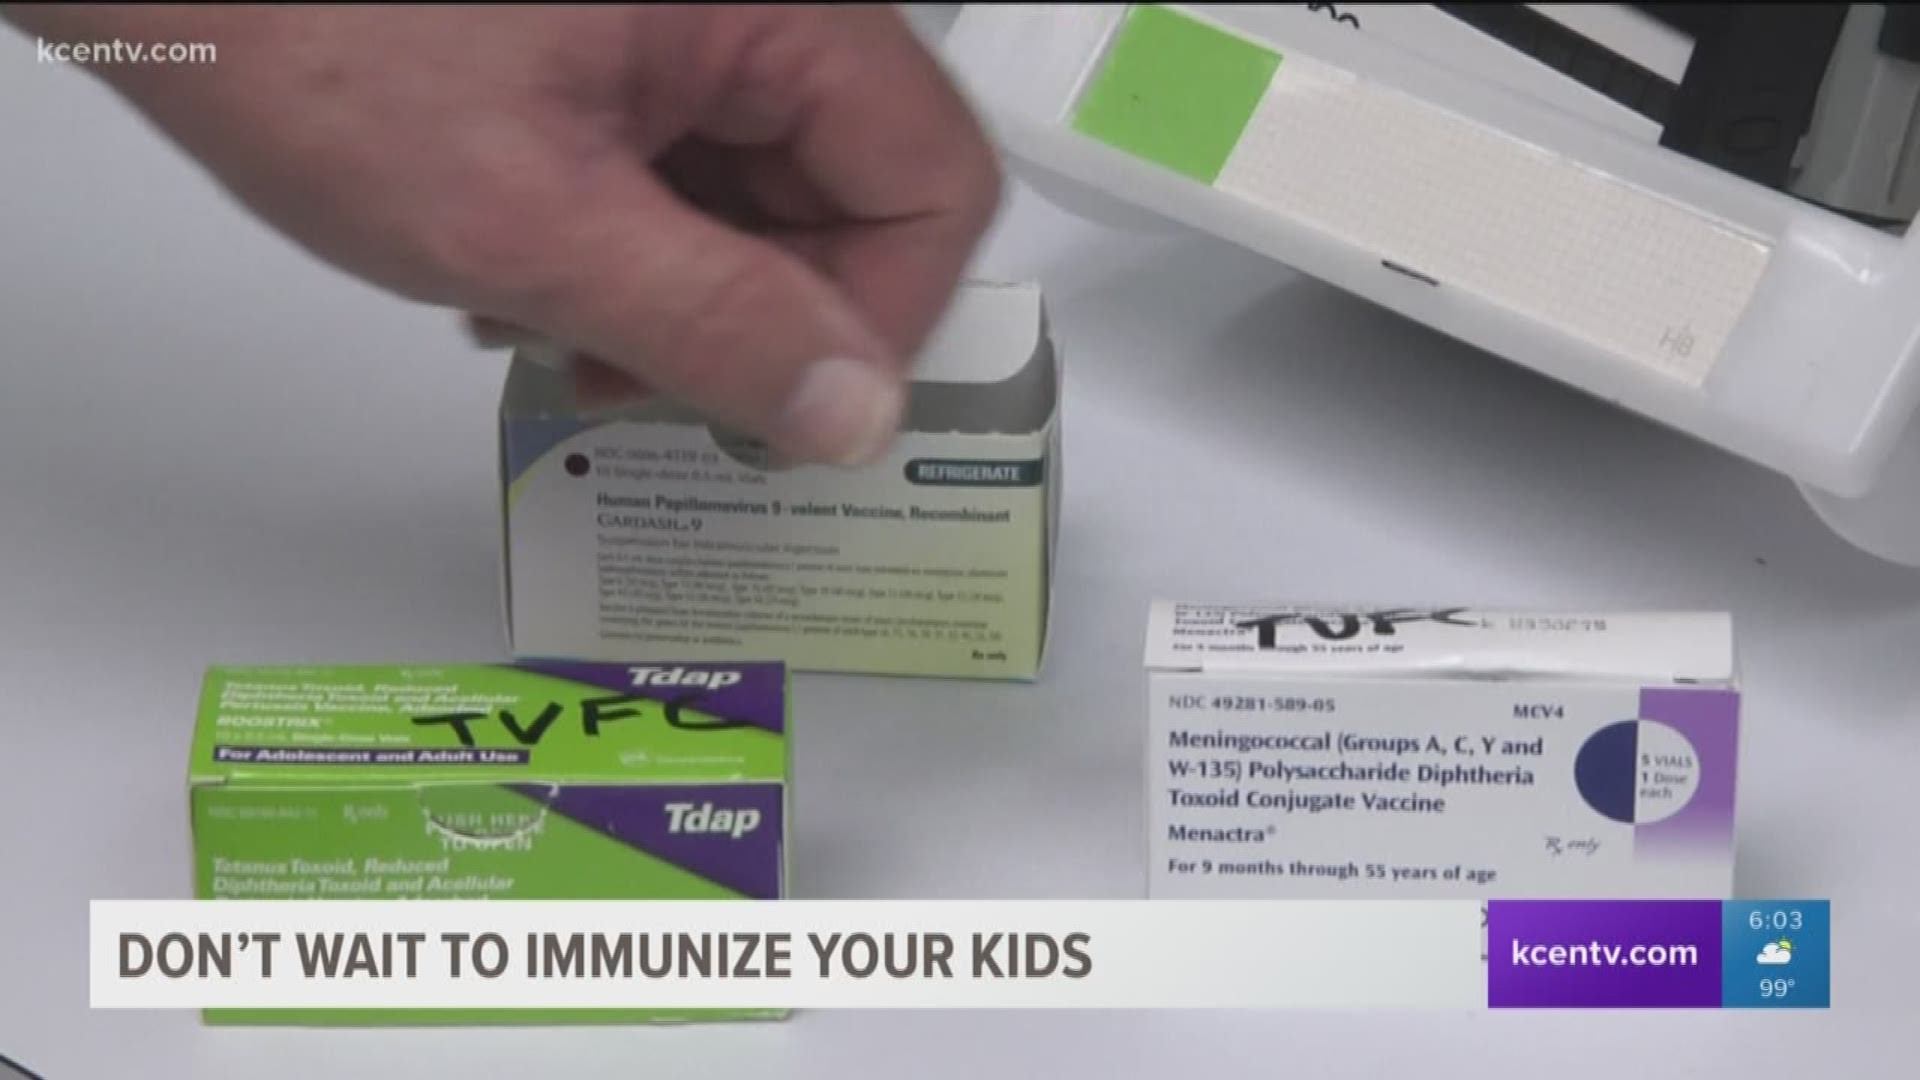 As kids get ready for the new school year there are some things to know when it comes to getting their immunization shots.